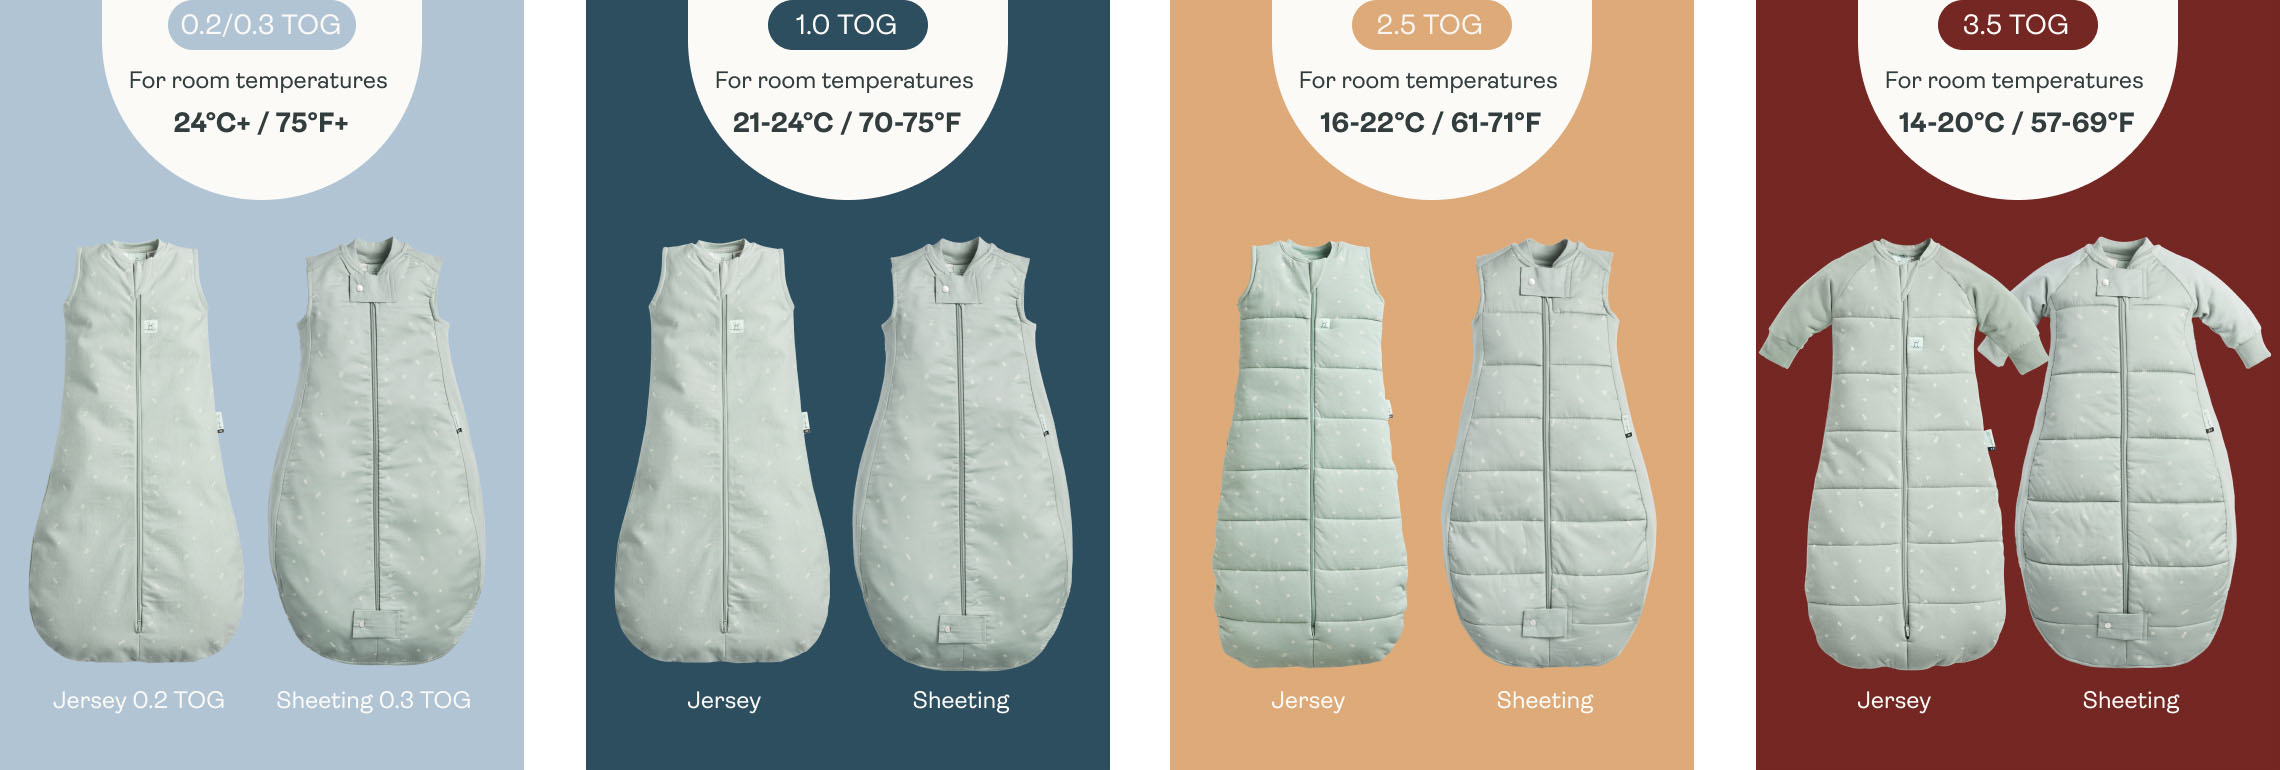 TOG options for ergoPouch sleeping bags